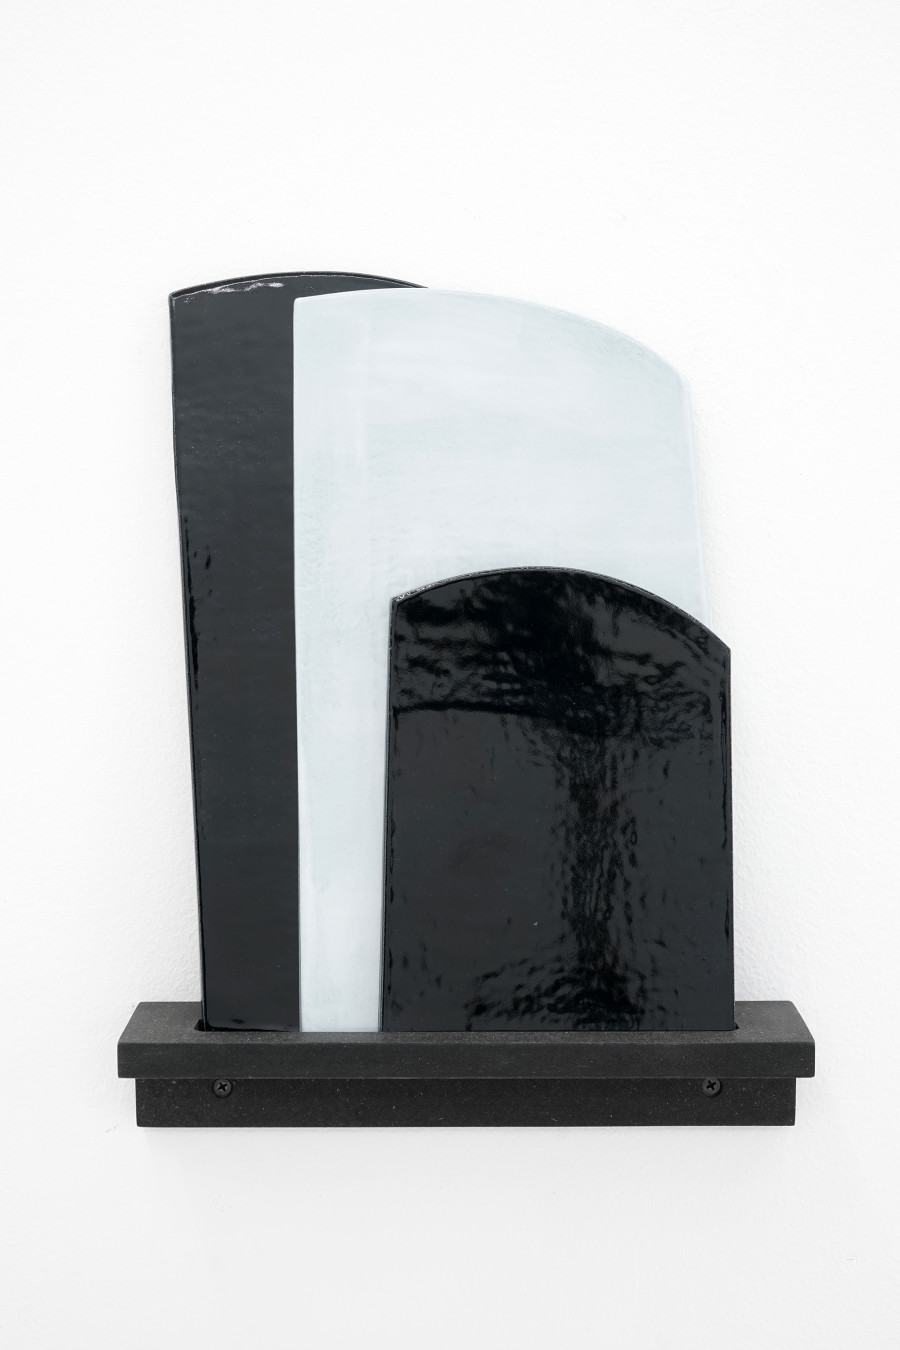 Clare Goodwin – Ceramic Whispers (Composed), 2021, glazed ceramic in 3parts, MDF shelf 37 x 29.3 x 7.8 cm, Courtesy of the artist and Herrmann Germann Conspirators, 2021